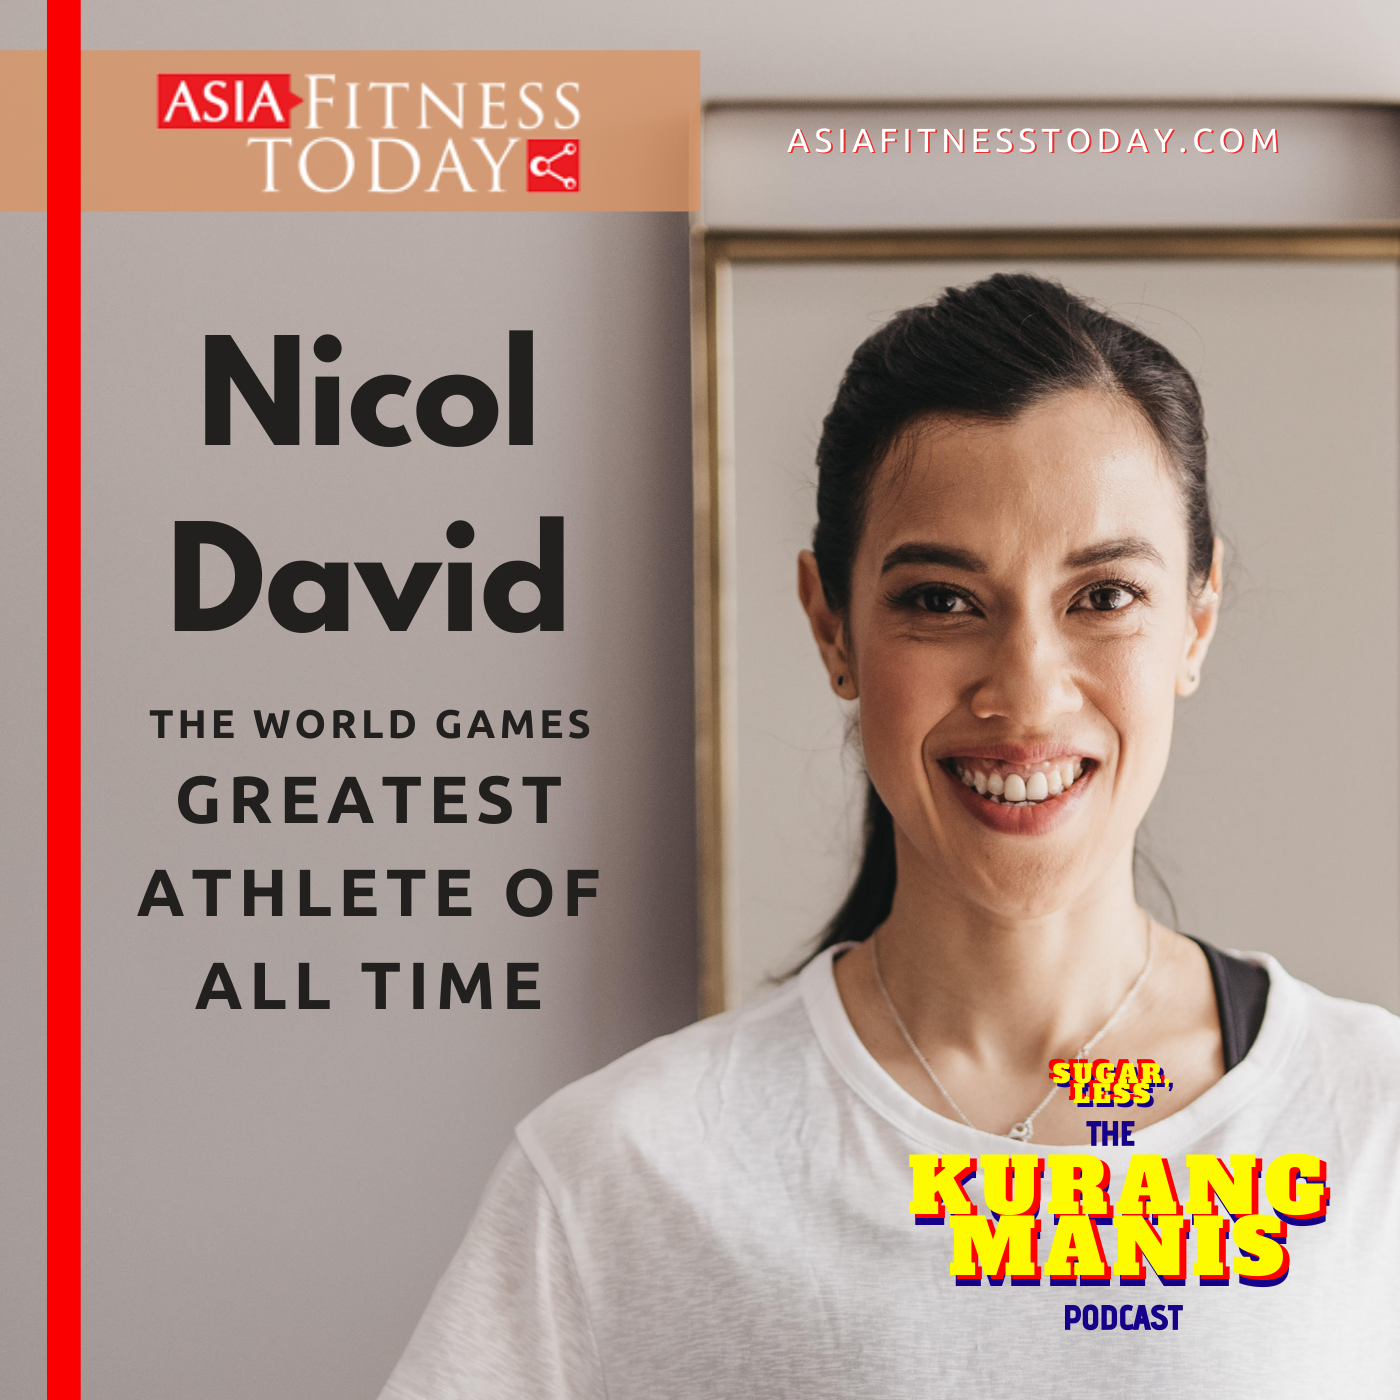 Asia Fitness Today The Kurang Manis (Sugar, Less) Podcast with The World Games Greatest Athlete of All Time, Nicol David